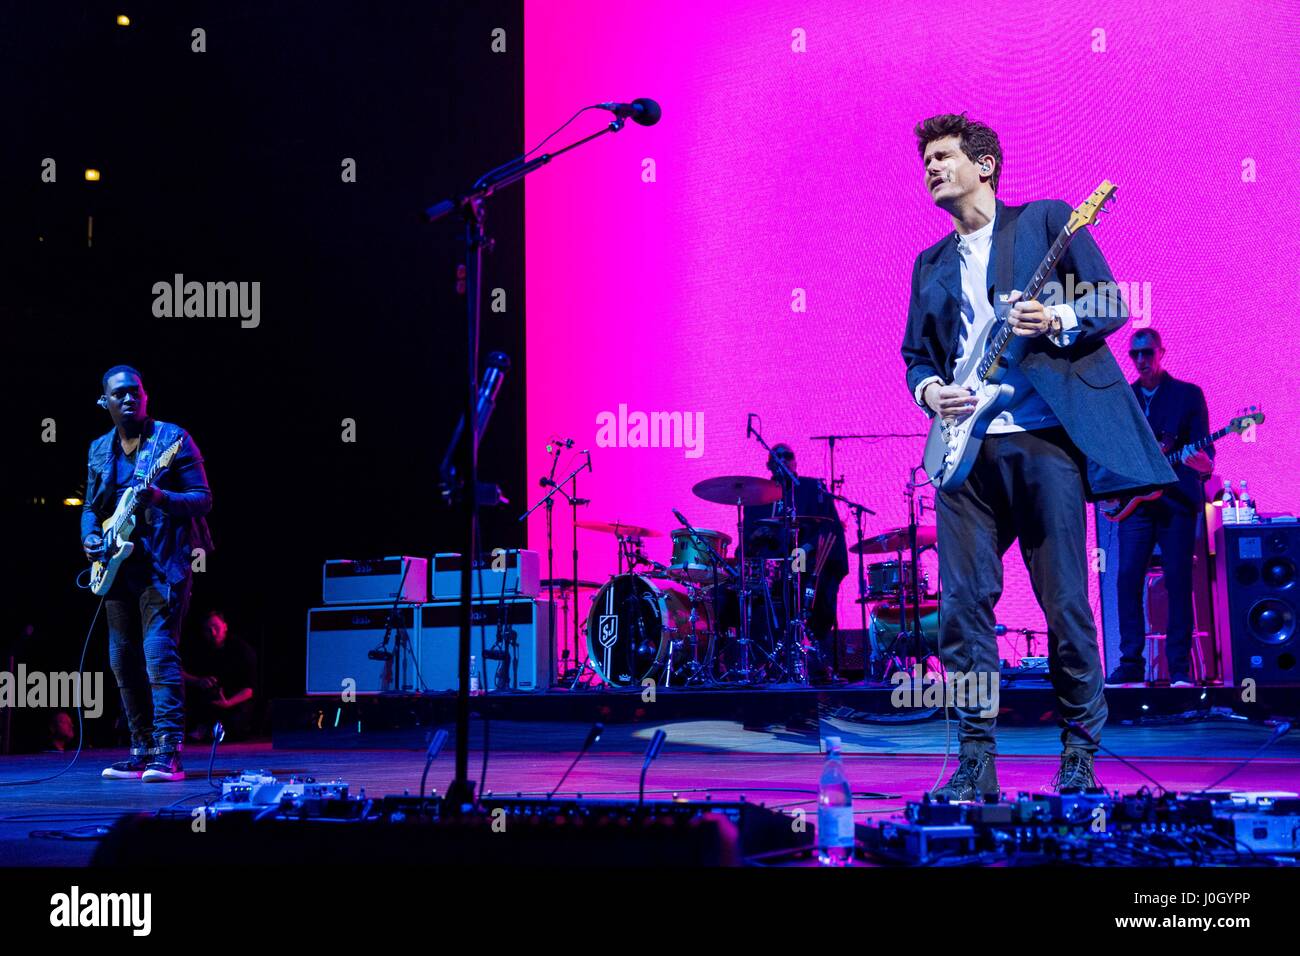 Chicago, Illinois, USA. 11th Apr, 2017. ISAIAH SHARKEY, STEVE JORDAN, JOHN  MAYER and PINO PALLADINO at United Center during The Search For Everything  Tour in Chicago, Illinois Credit: Daniel DeSlover/ZUMA Wire/Alamy Live